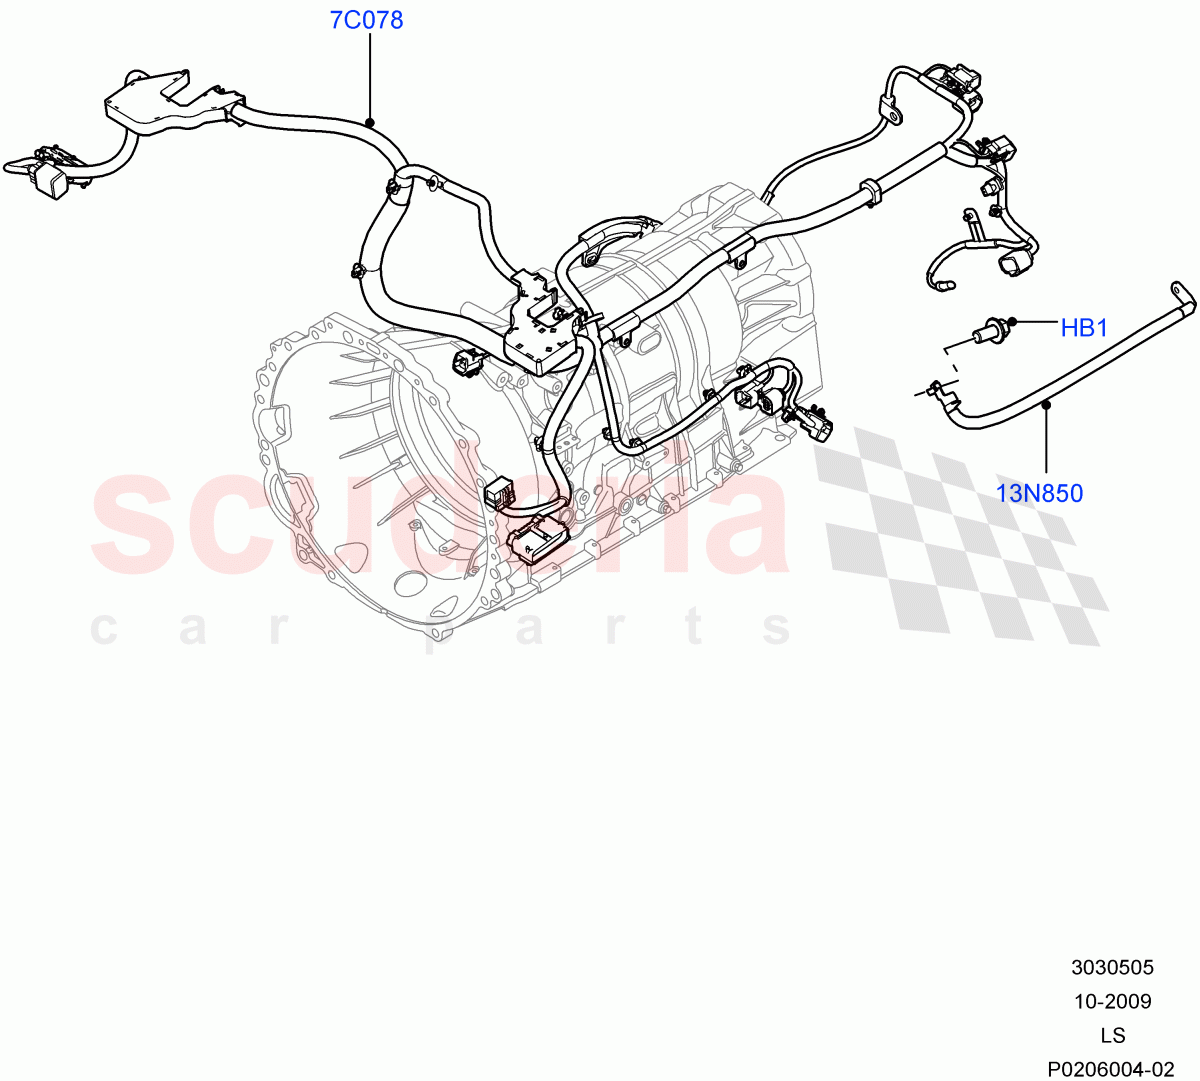 Electrical Wiring - Engine And Dash(Case Assy / Transmission)((V)FROMAA000001) of Land Rover Land Rover Discovery 4 (2010-2016) [3.0 Diesel 24V DOHC TC]